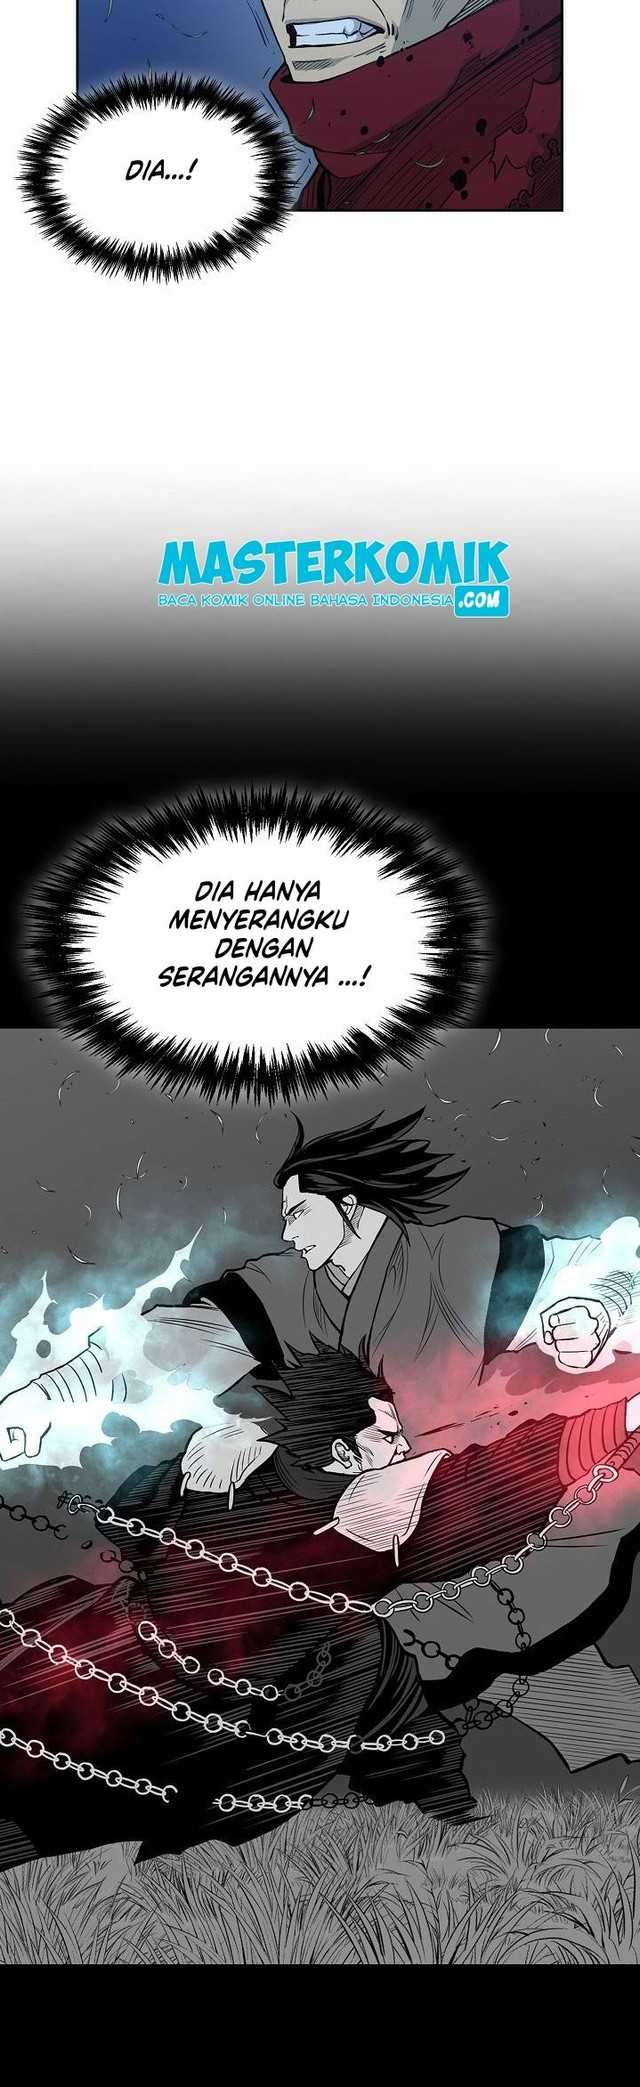 Record of the War God Chapter 83